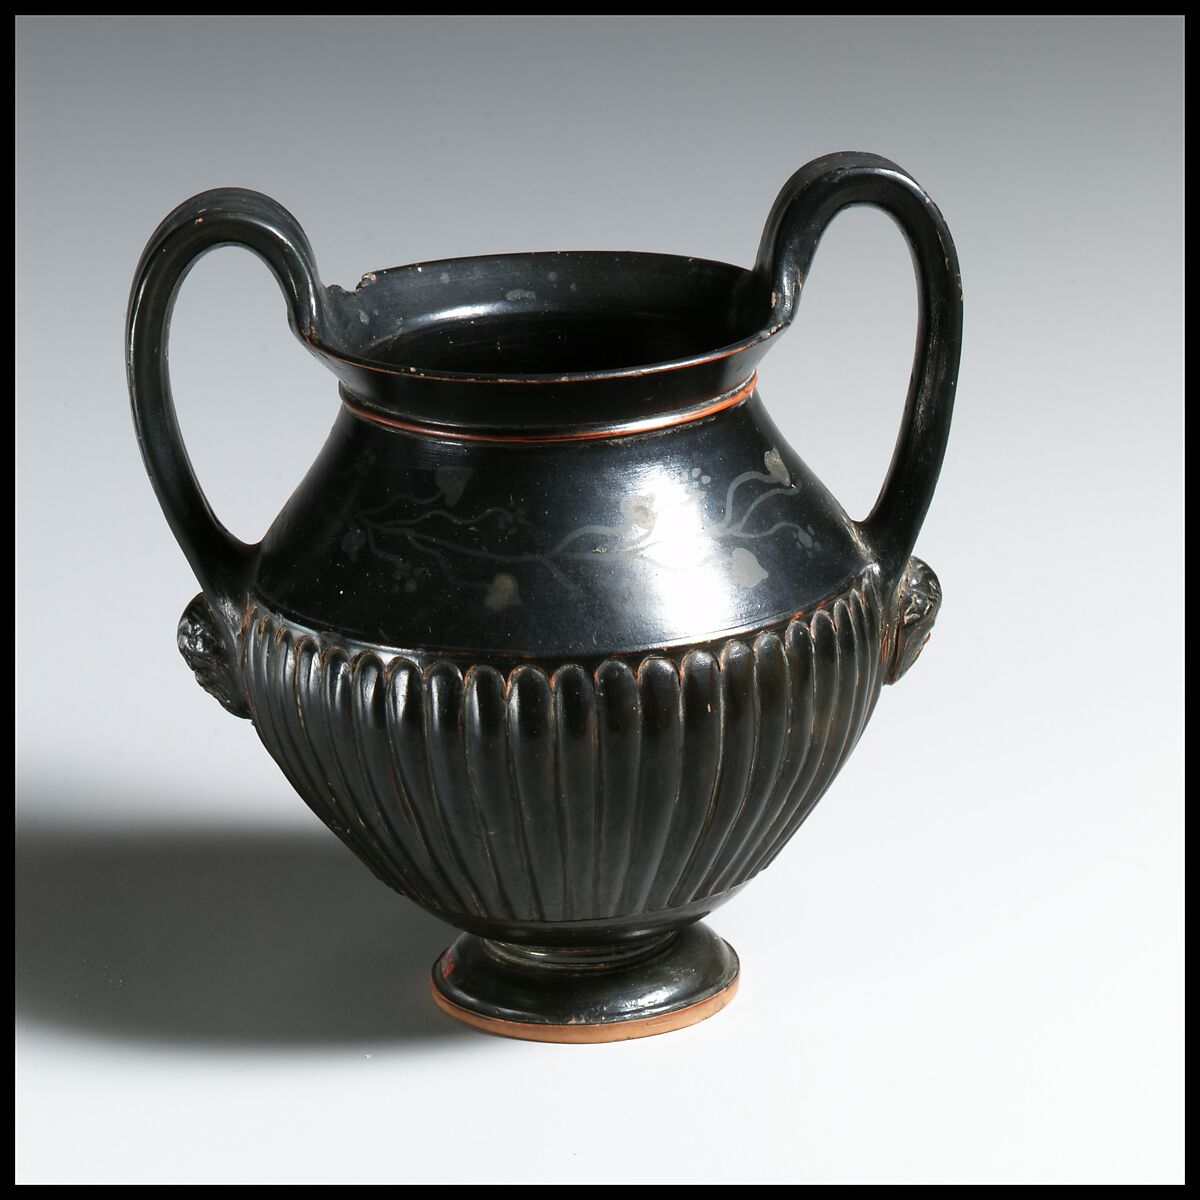 Terracotta kantharos (drinking cup with high handles), Attributed to the Xenon Group, Terracotta, Greek, South Italian, Apulian 